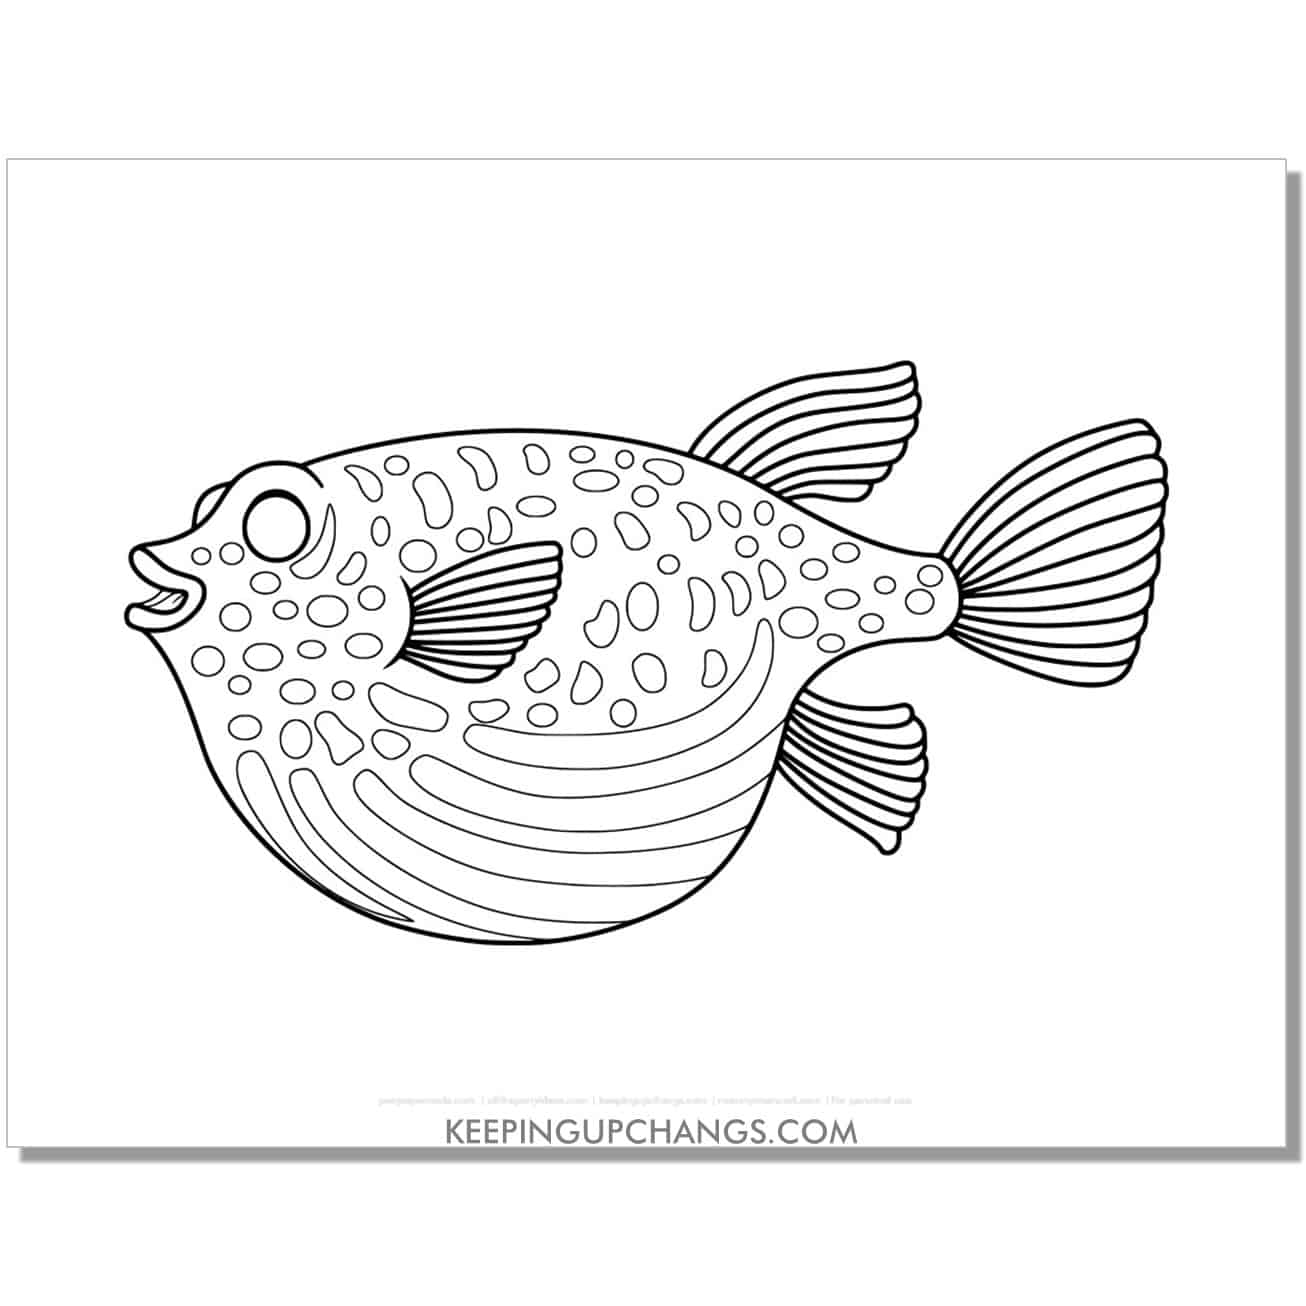 free spotted fish coloring page, sheet.